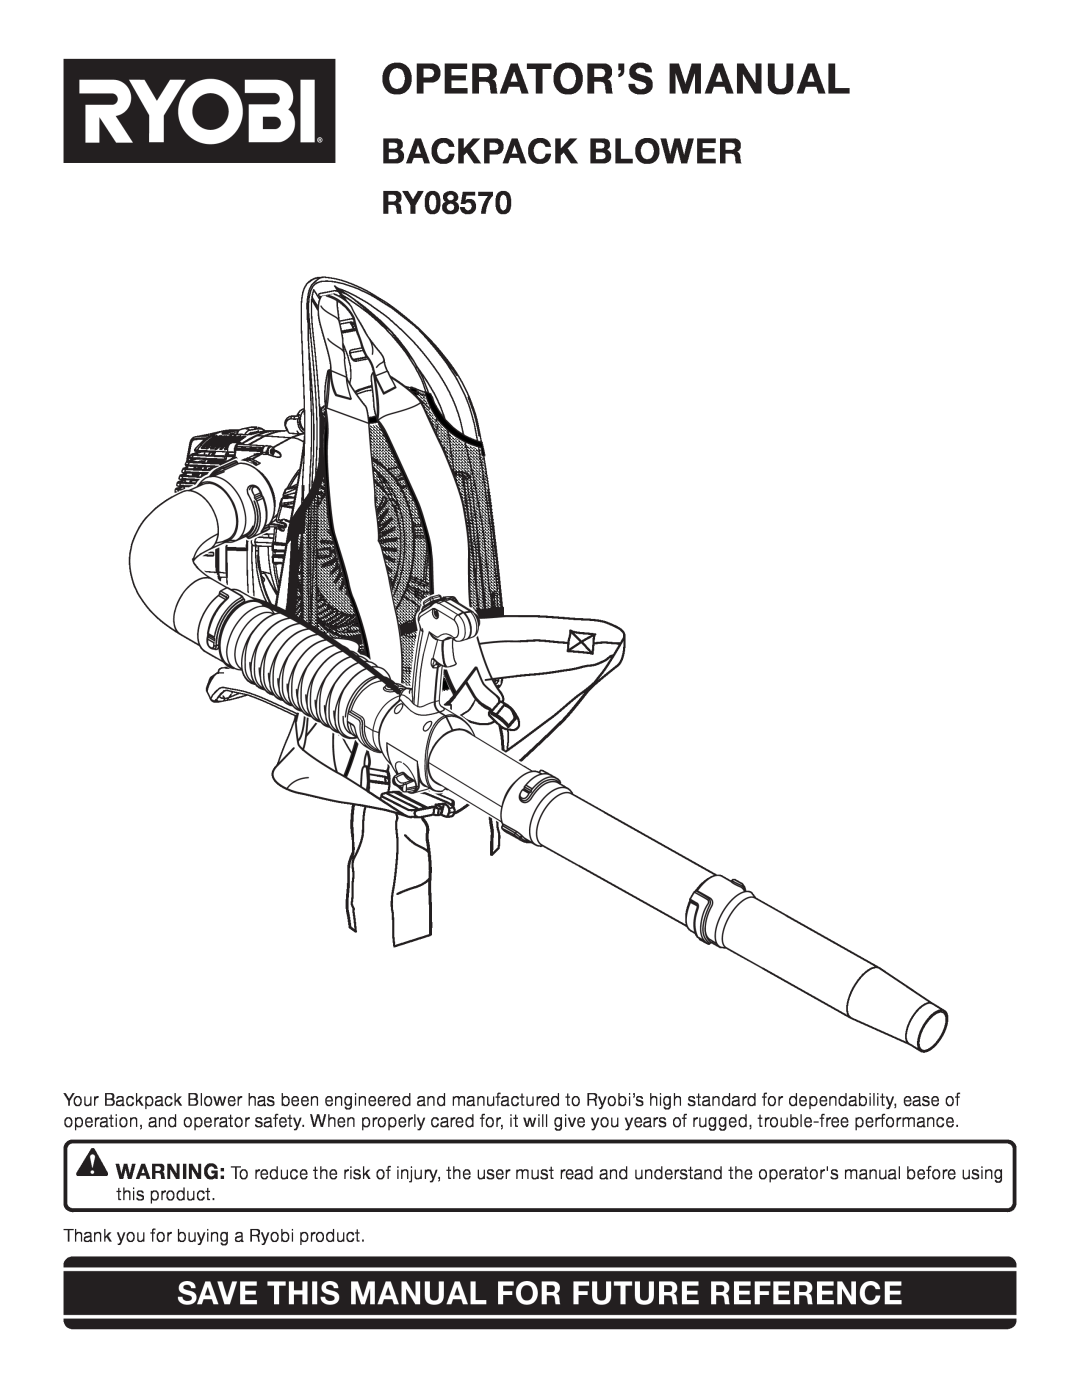 Ryobi Outdoor RY08570 manual Operator’S Manual, Backpack Blower, Save This Manual For Future Reference 